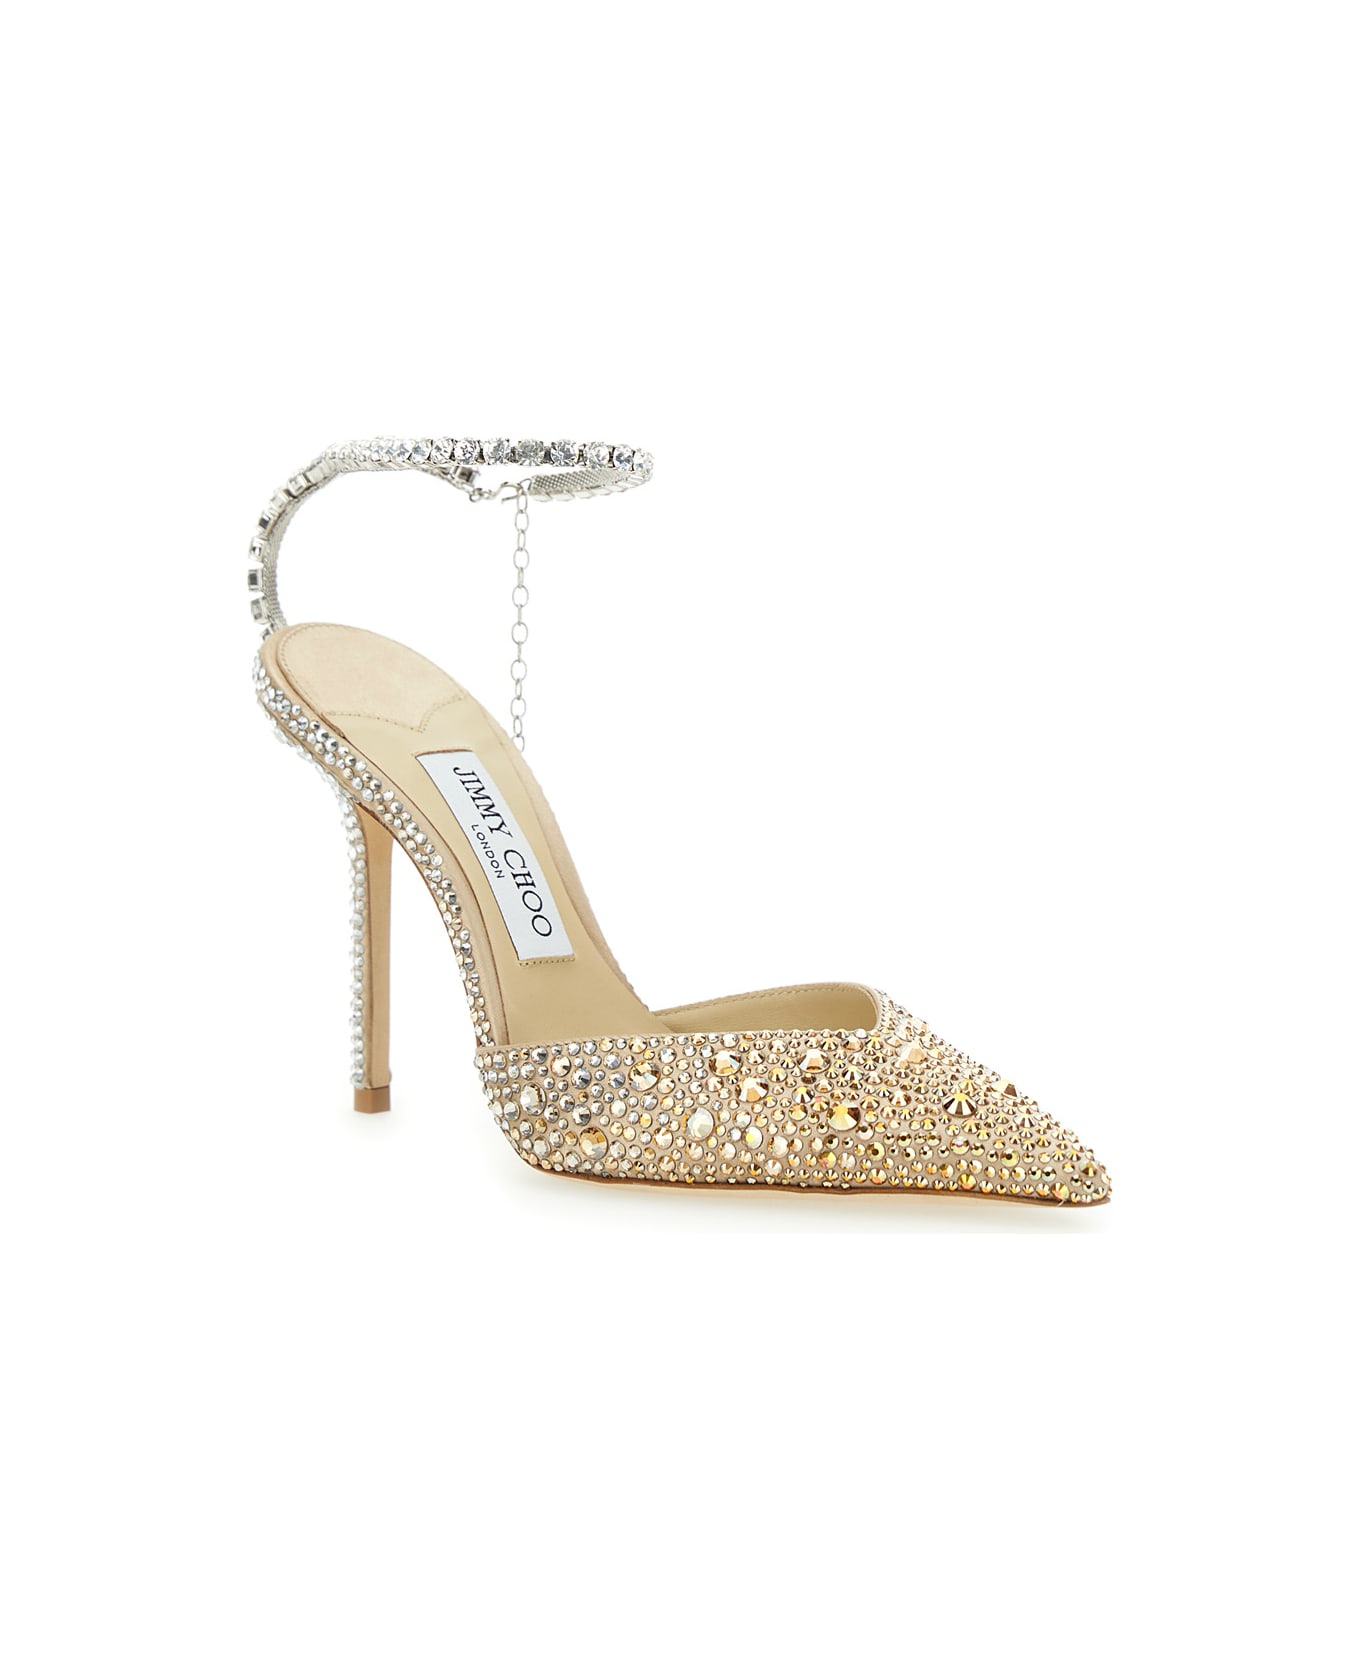 Jimmy Choo 'saeda 100' Gold Pumps With All-over Crystals In Satin Woman - Beige ハイヒール